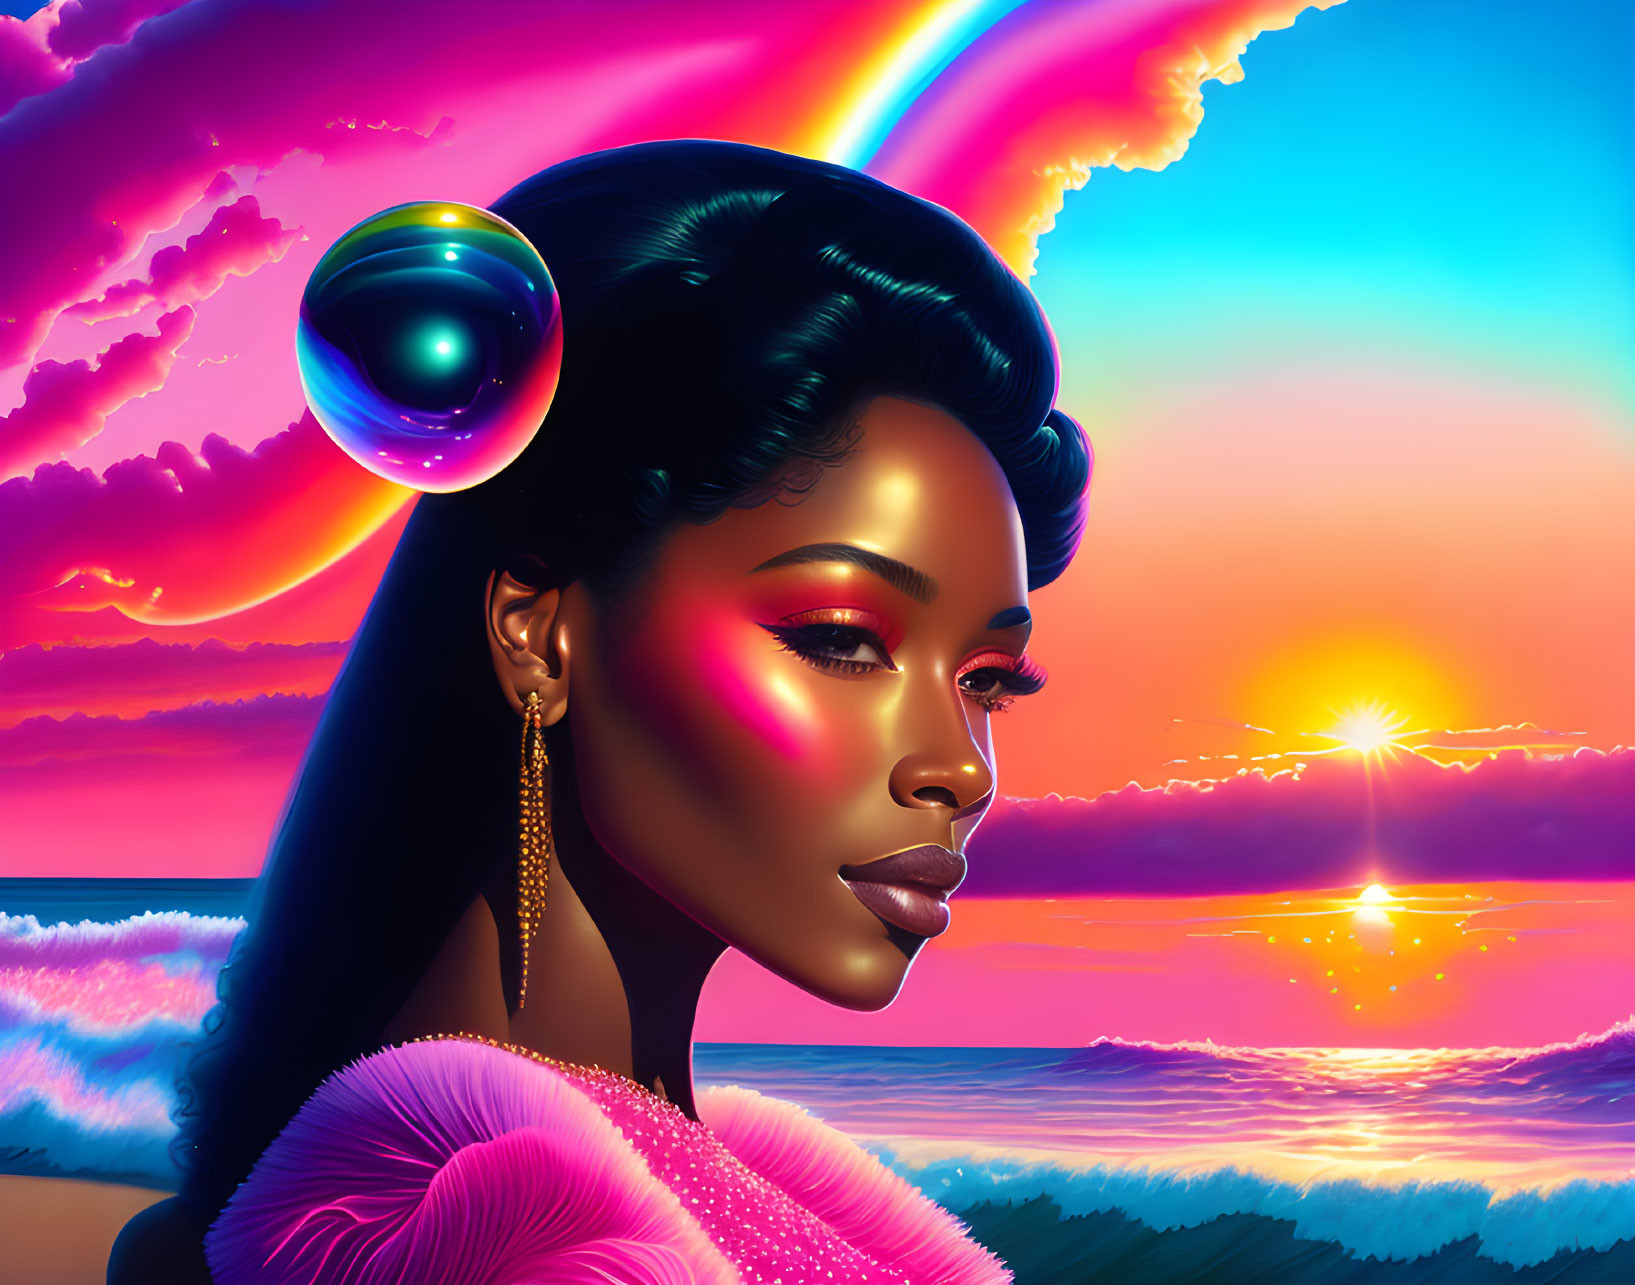 Colorful digital artwork of woman with glossy skin, earring, and bubble in sunset backdrop.